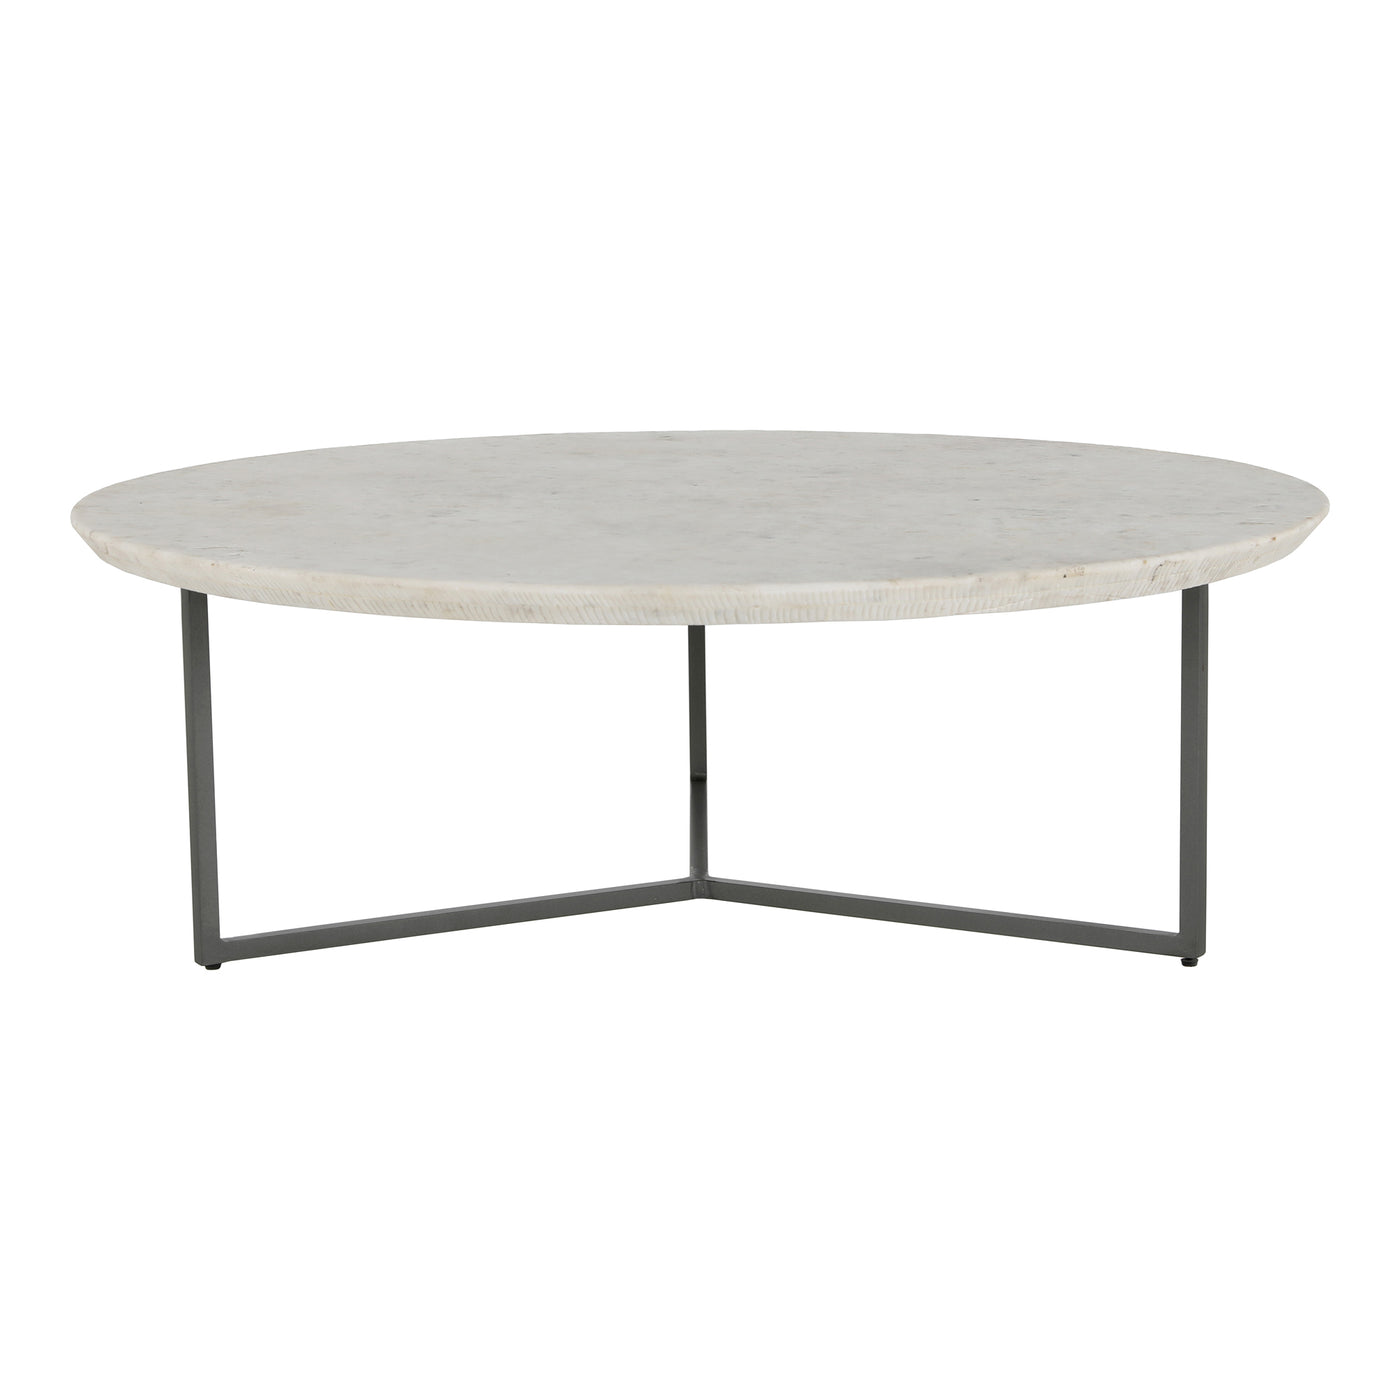 An elegant mid-century modern piece thats set in stone. Solid iron legs are topped with a generous white slab of marble f...